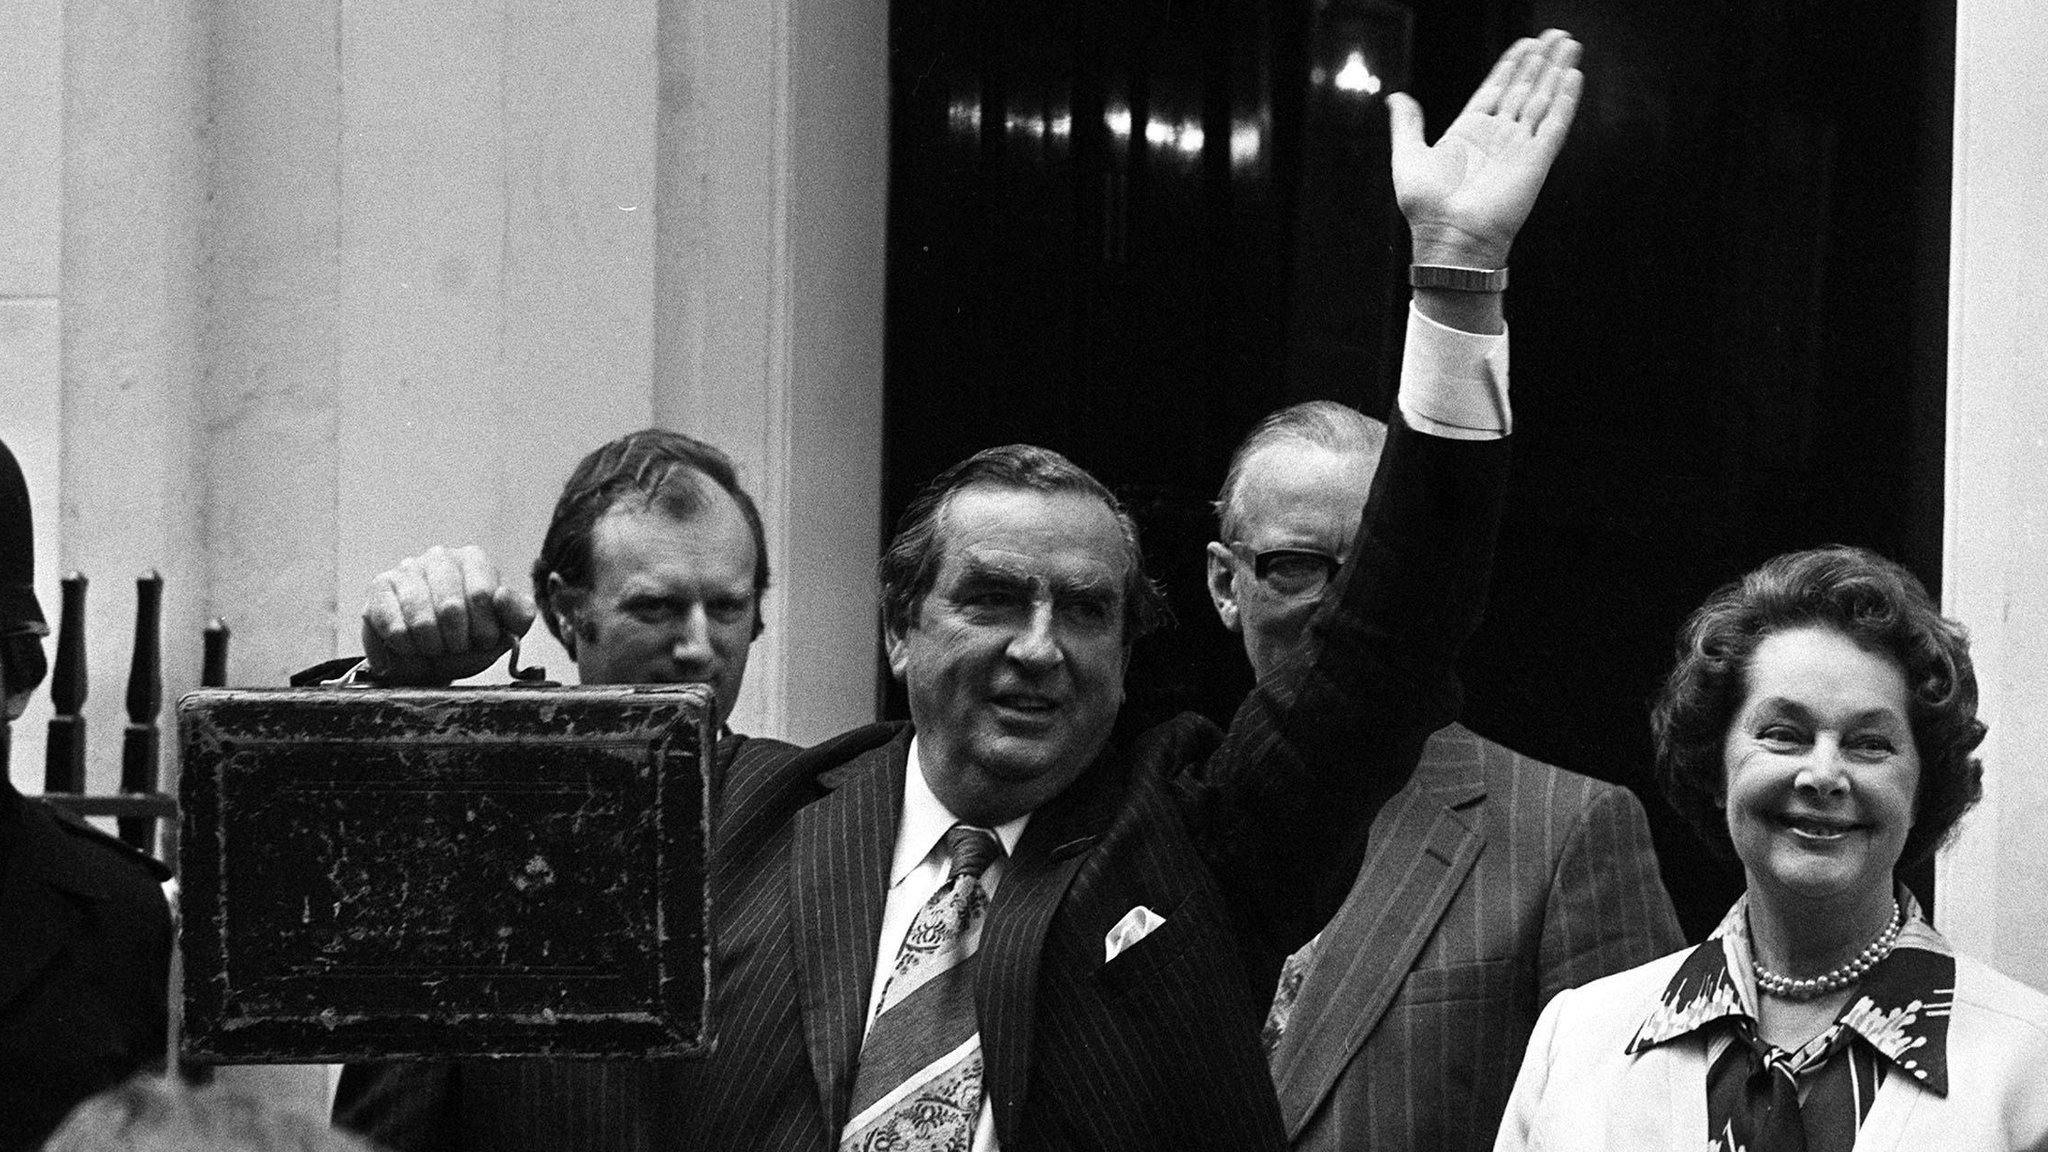 Chancellor of the Exchequer Denis Healey, holding the budget box and accompanied by his wife Edna, waves the crowd as they leave Number 11 (Eleven) Downing Street for the House of Commons where Mr Healey will present his budget